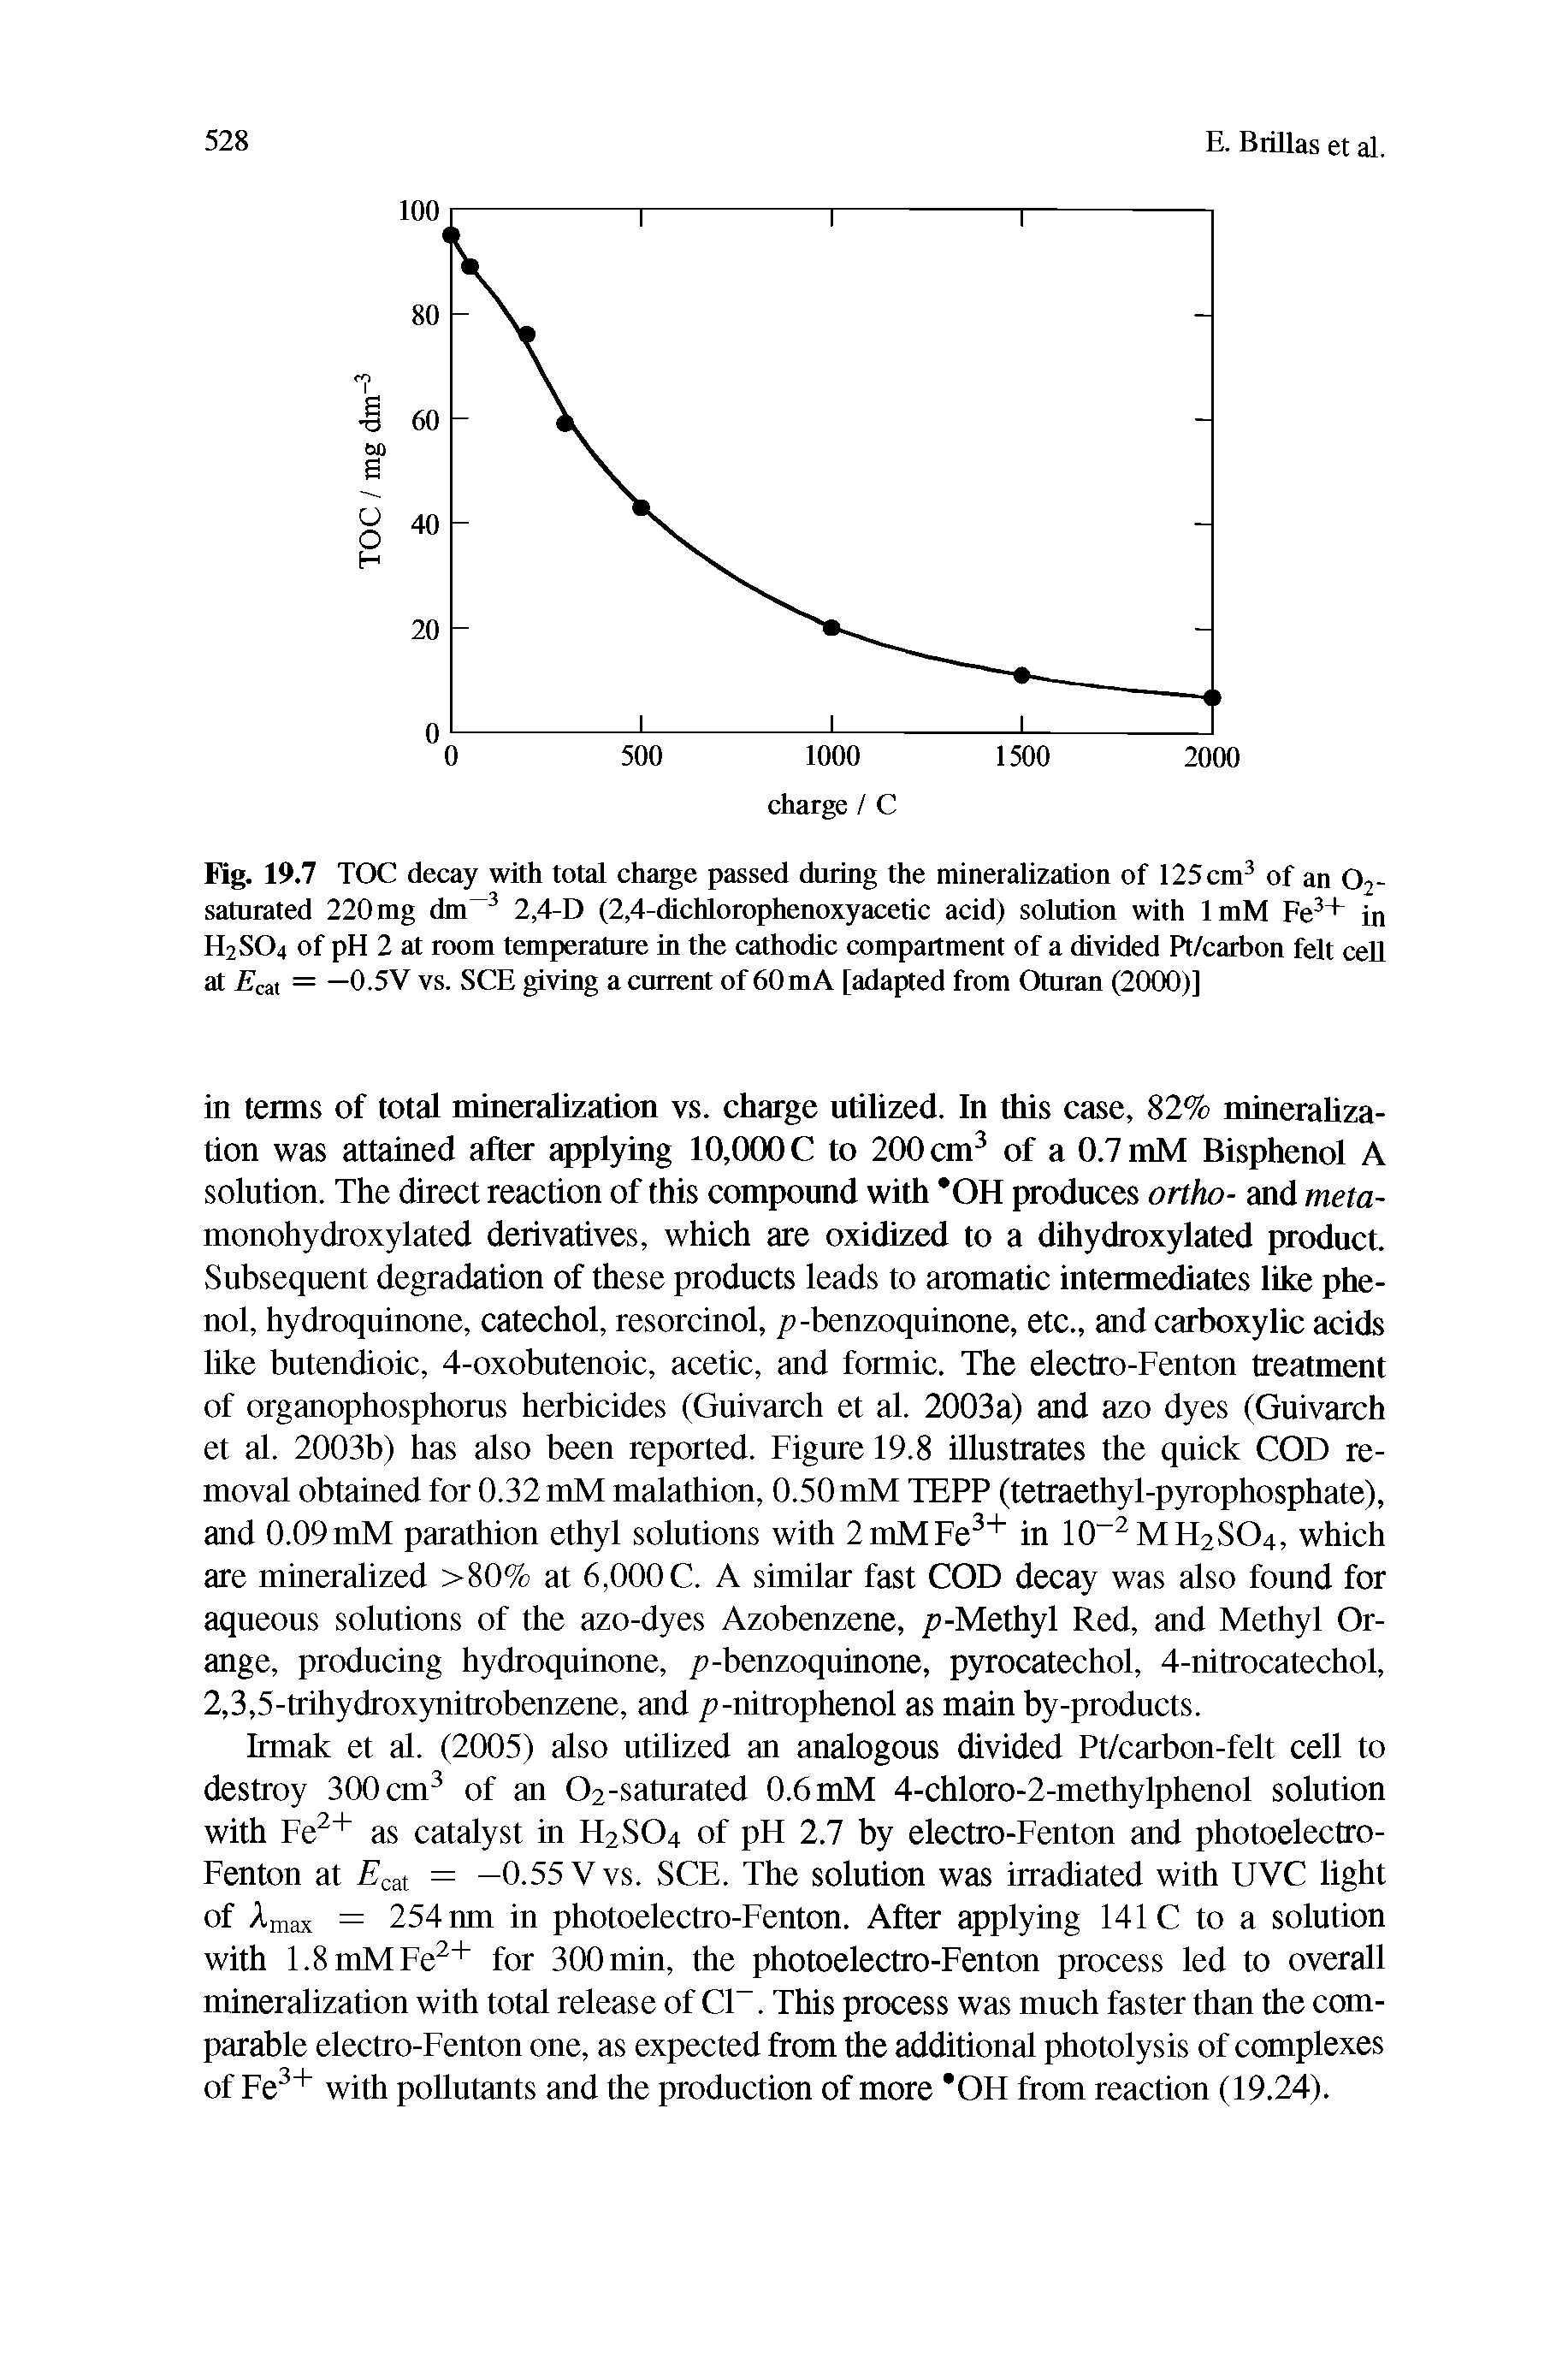 Fig. 19.7 TOC decay with total charge passed during the mineralization of 125 cm3 of an 02-saturated 220 mg dm 3 2,4-D (2,4-dichlorophenoxyacetic acid) solution with ImM Fe3+ in H2SO4 of pH 2 at room temperature in the cathodic compartment of a divided Pt/carbon felt cell at Ecm = —0.5V vs. SCE giving a current of 60 mA [adapted from Oturan (2000)]...